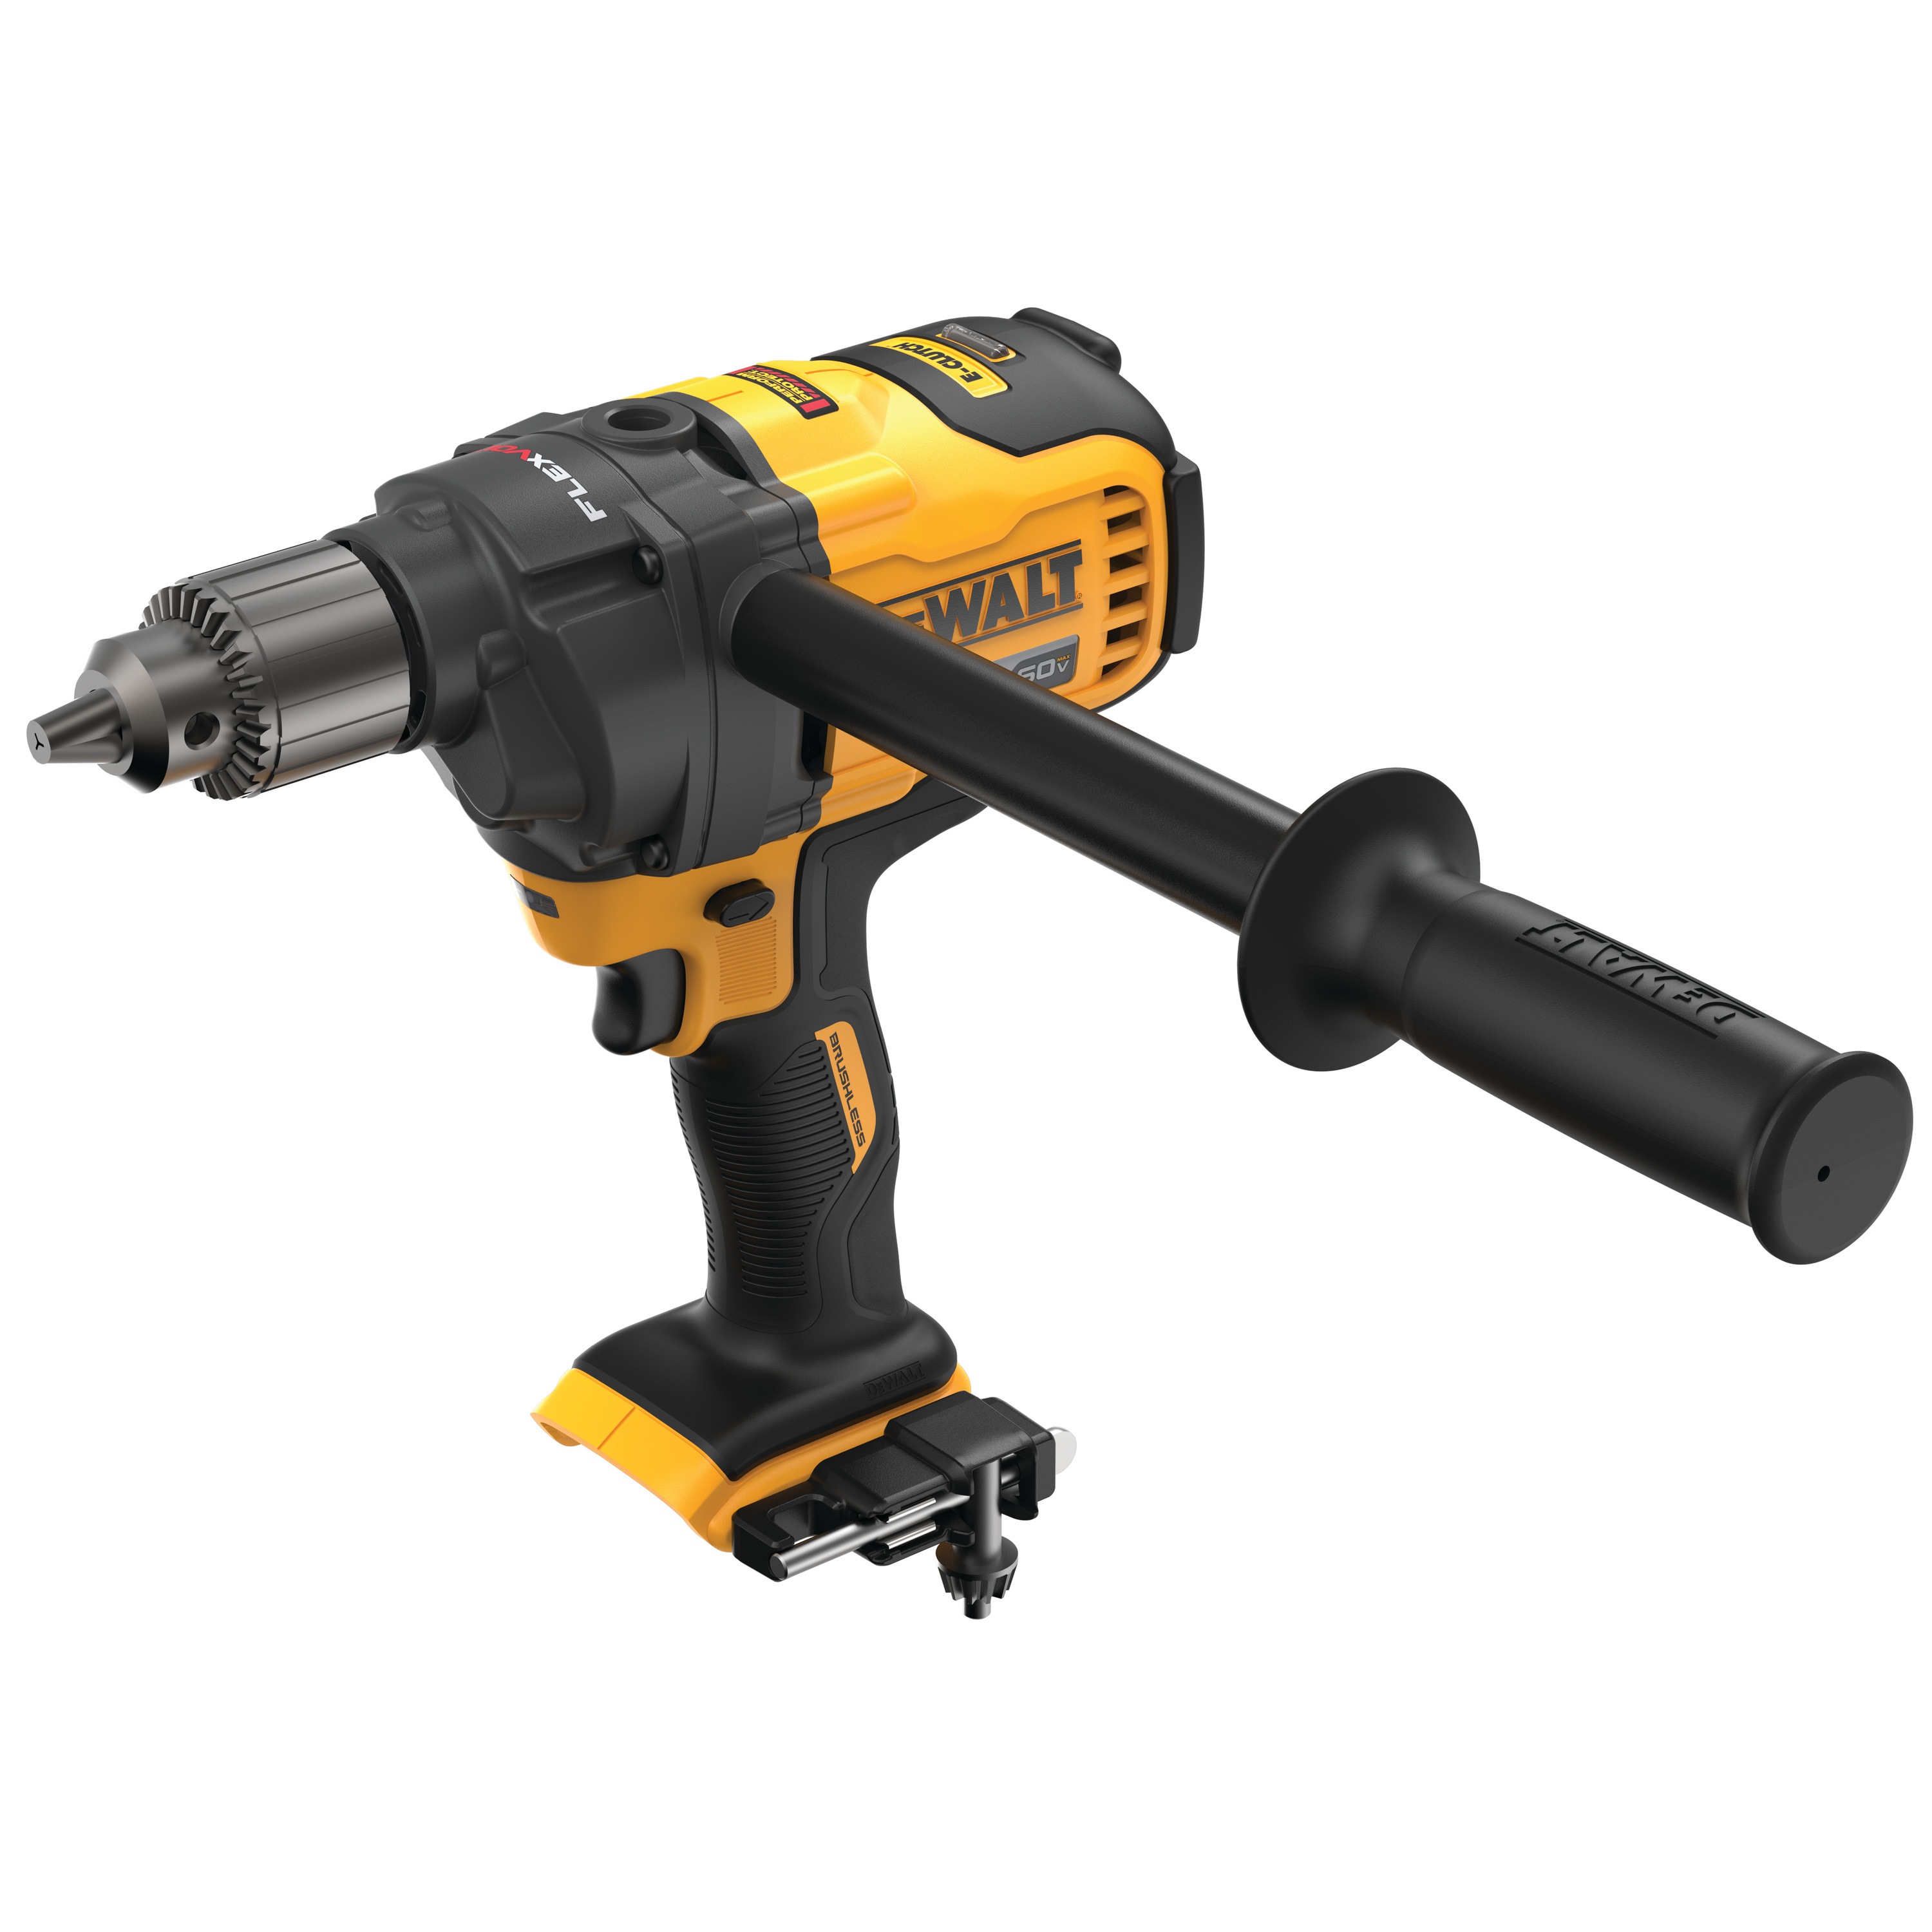 DEWALT - 60V MAX MixerDrill with EClutch System Tool only - DCD130B